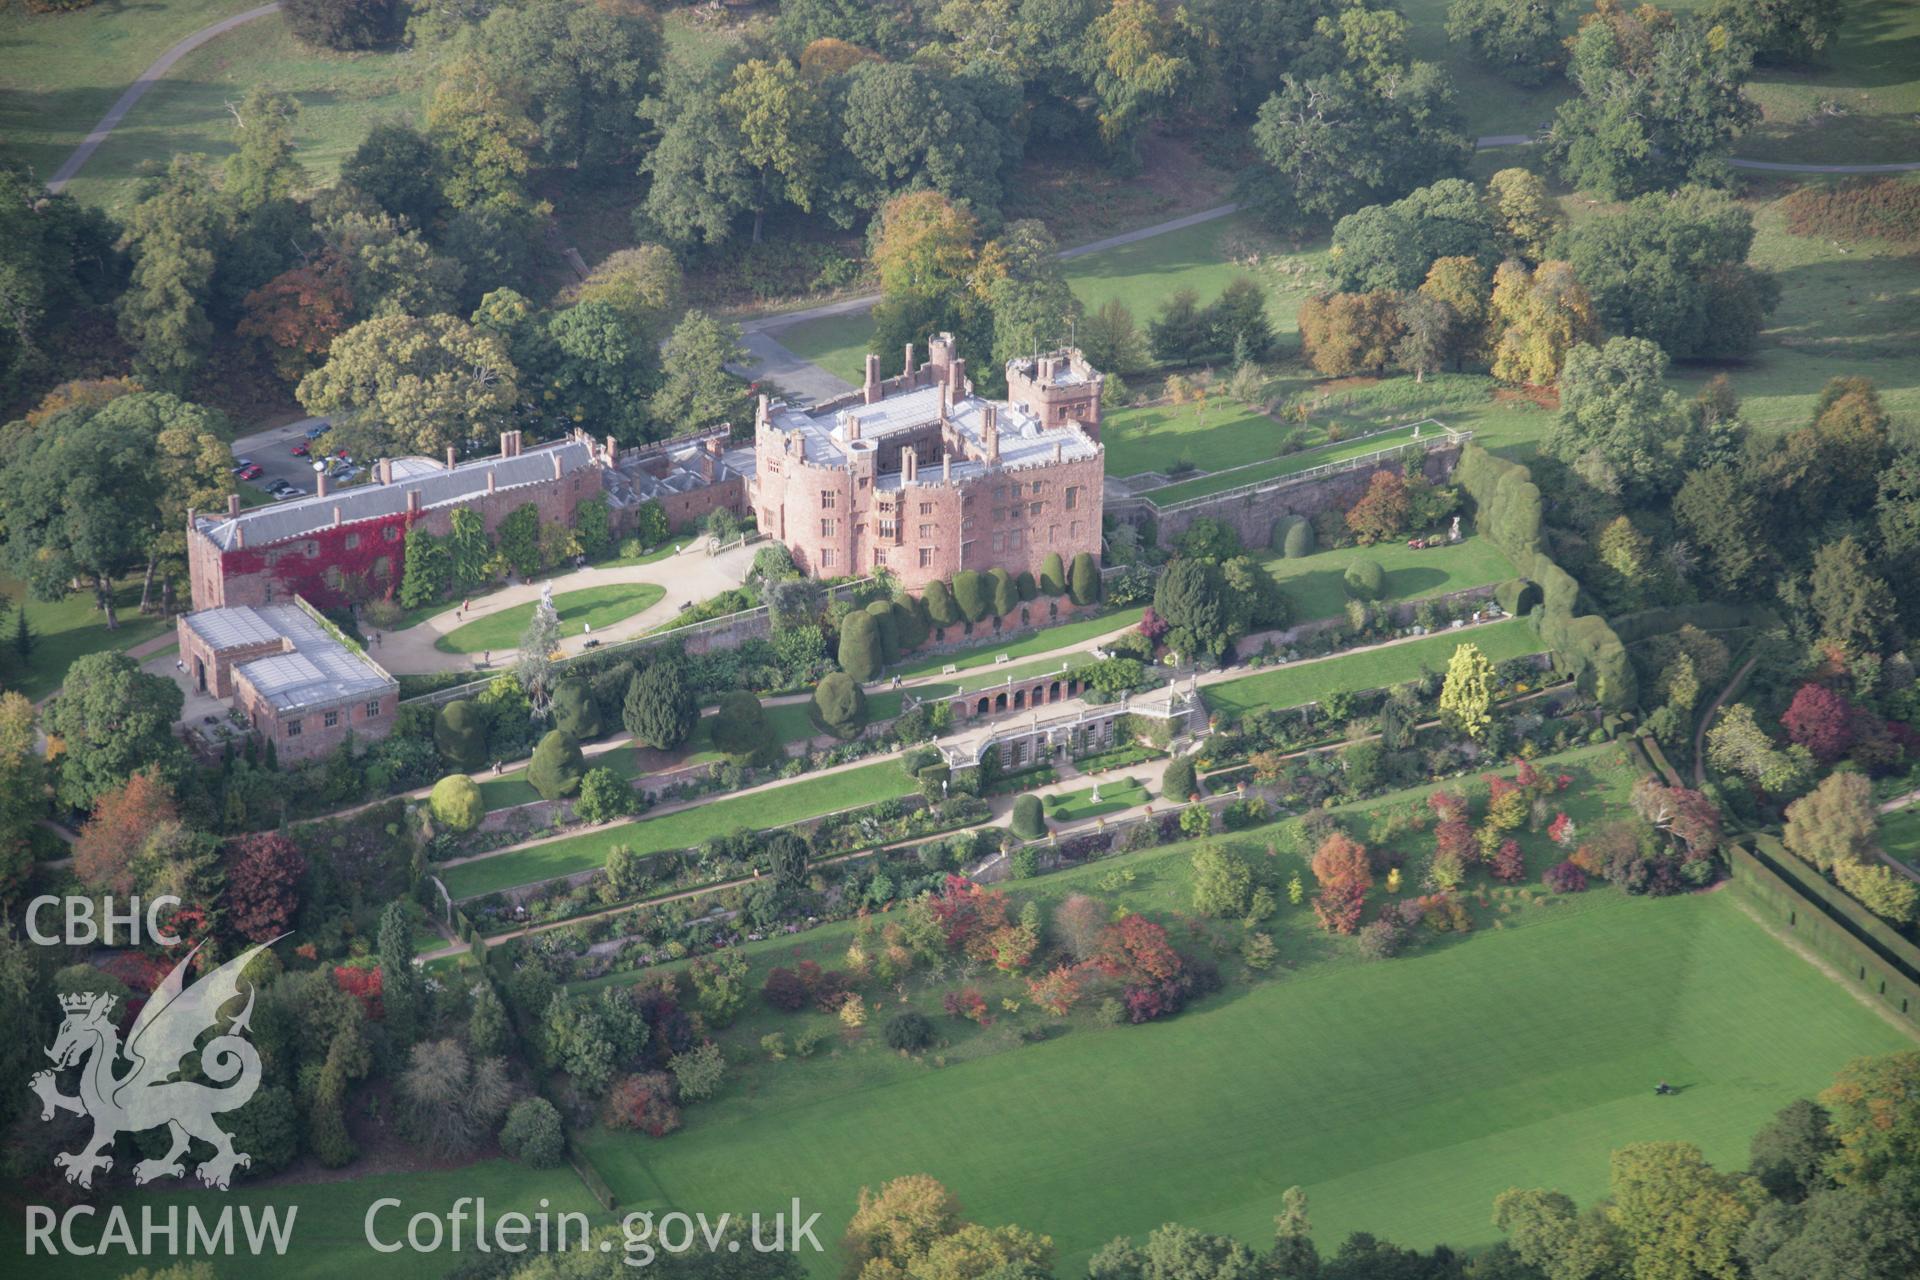 RCAHMW colour oblique aerial photograph of Powis Castle, also showing the gardens in autumn colour, from the south. Taken on 17 October 2005 by Toby Driver